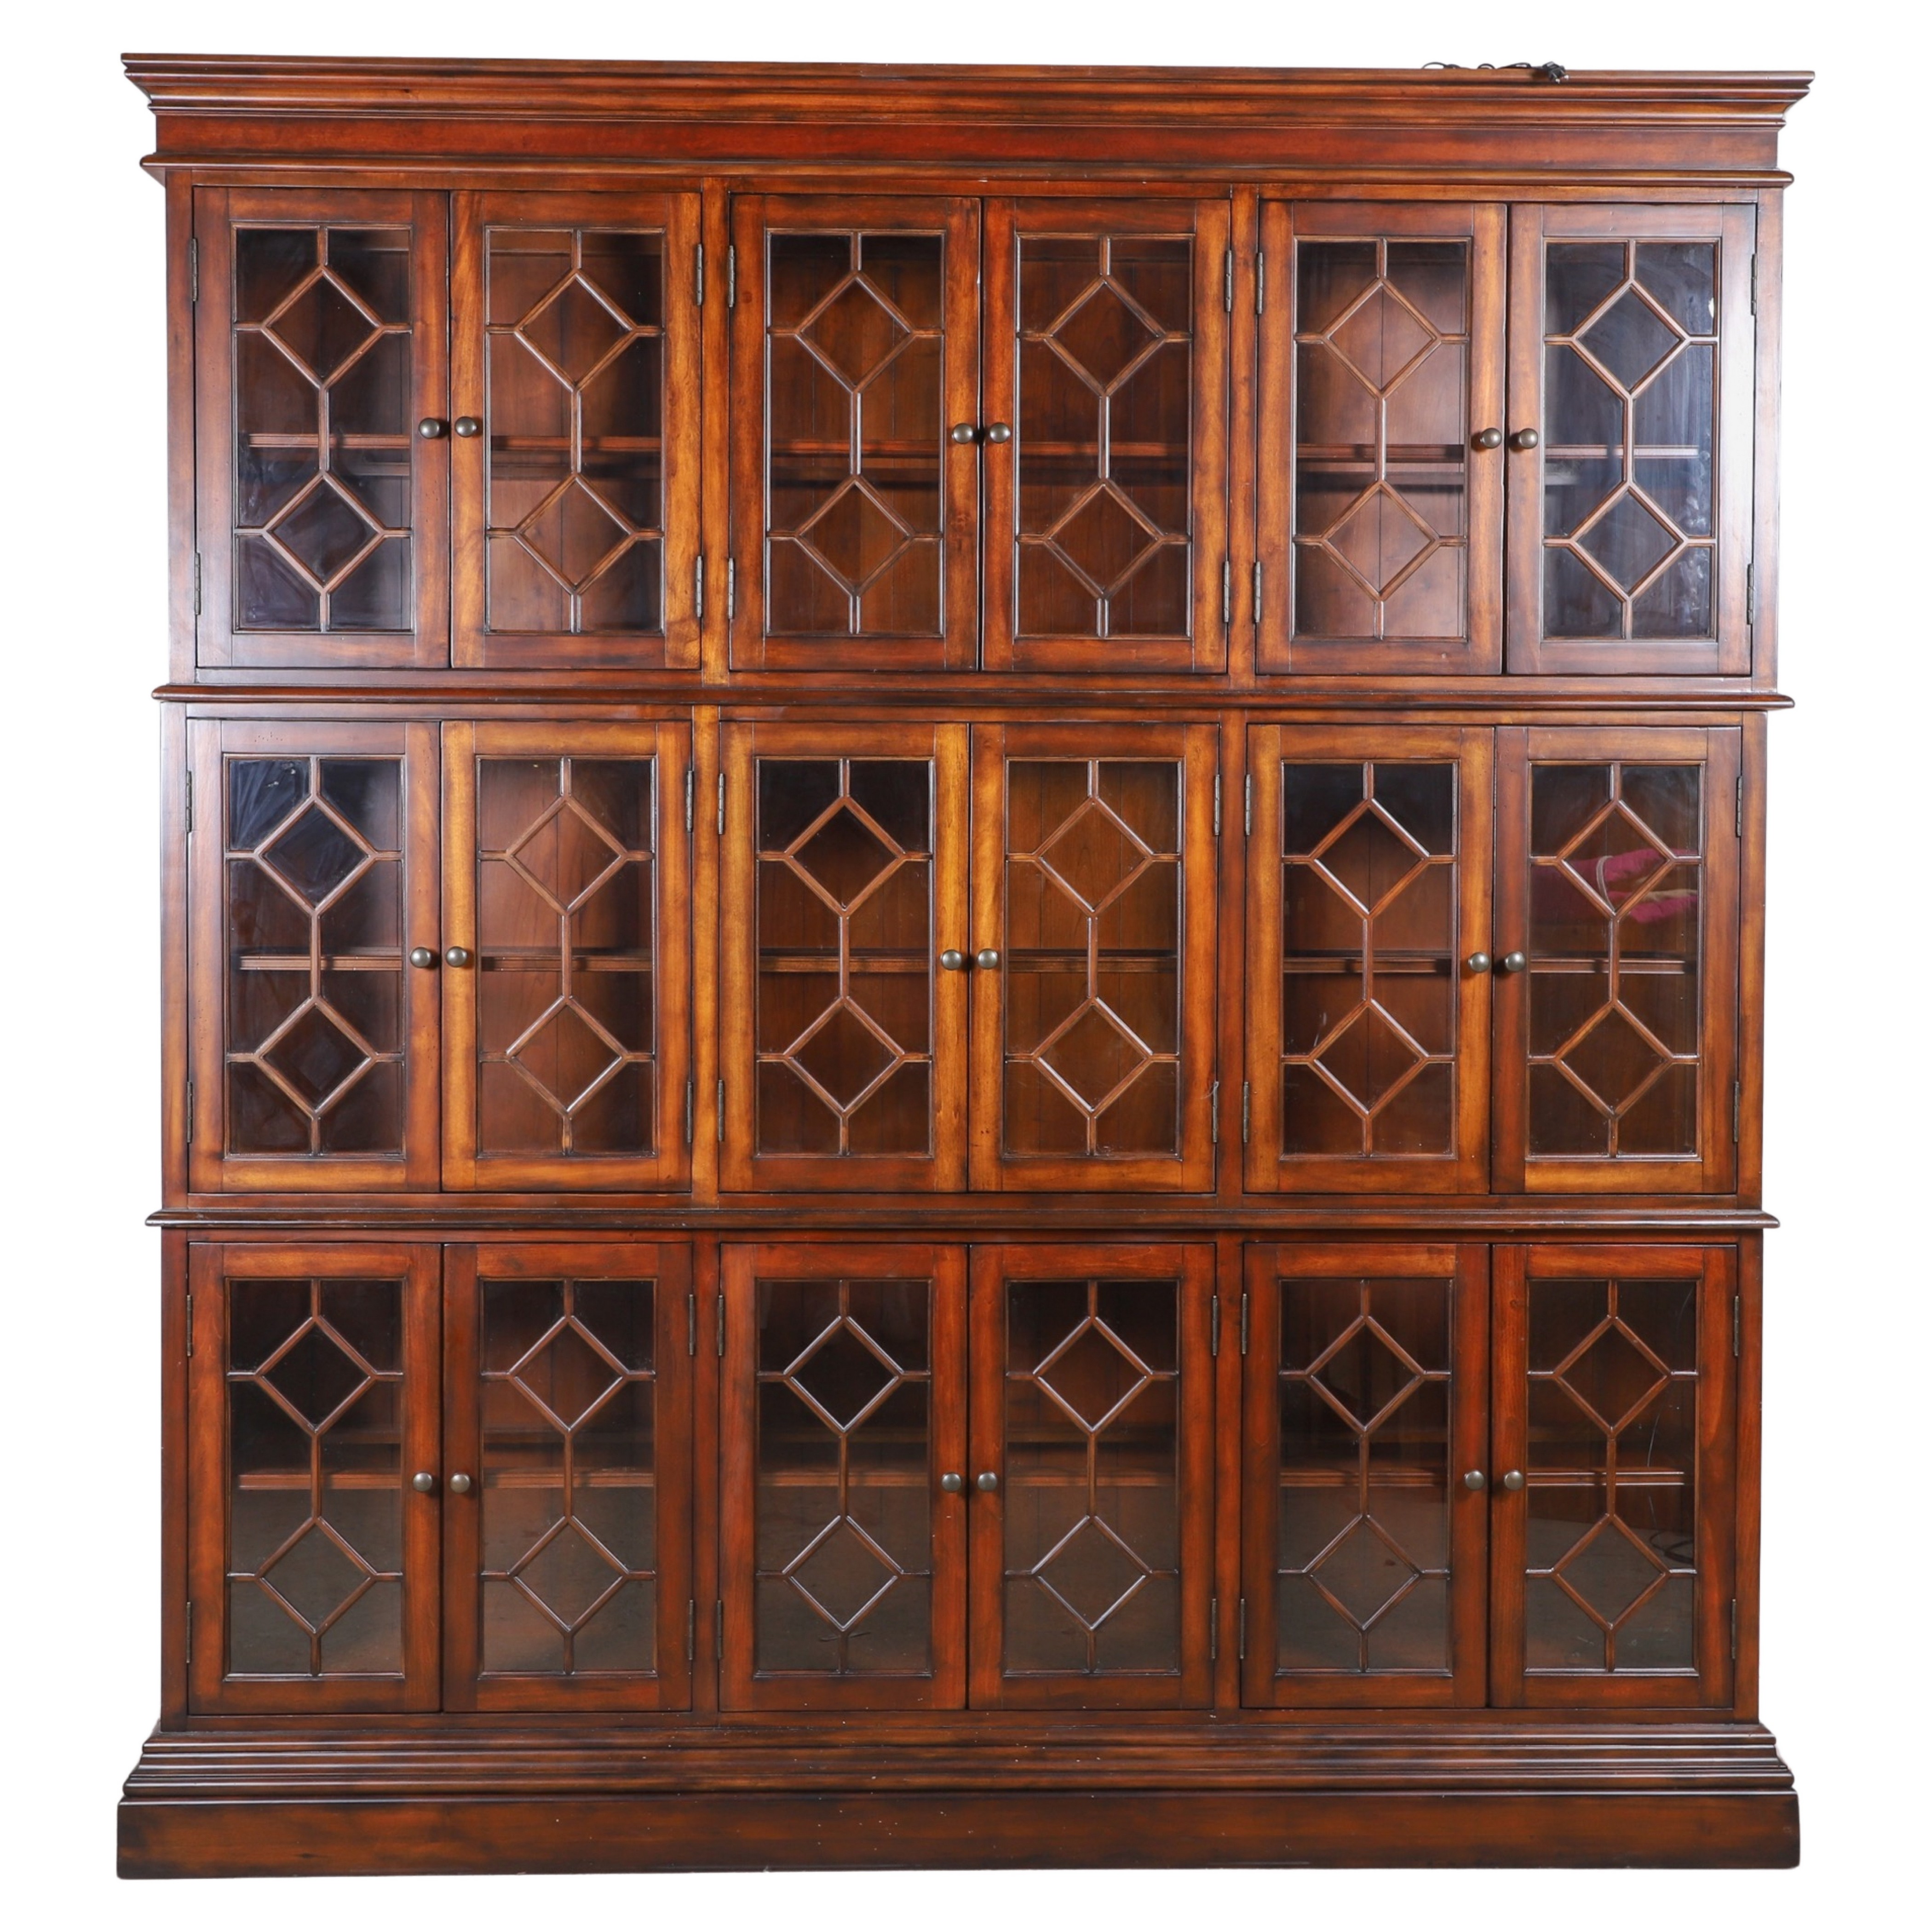  4 part stacked cherry wall unit  3b4a92